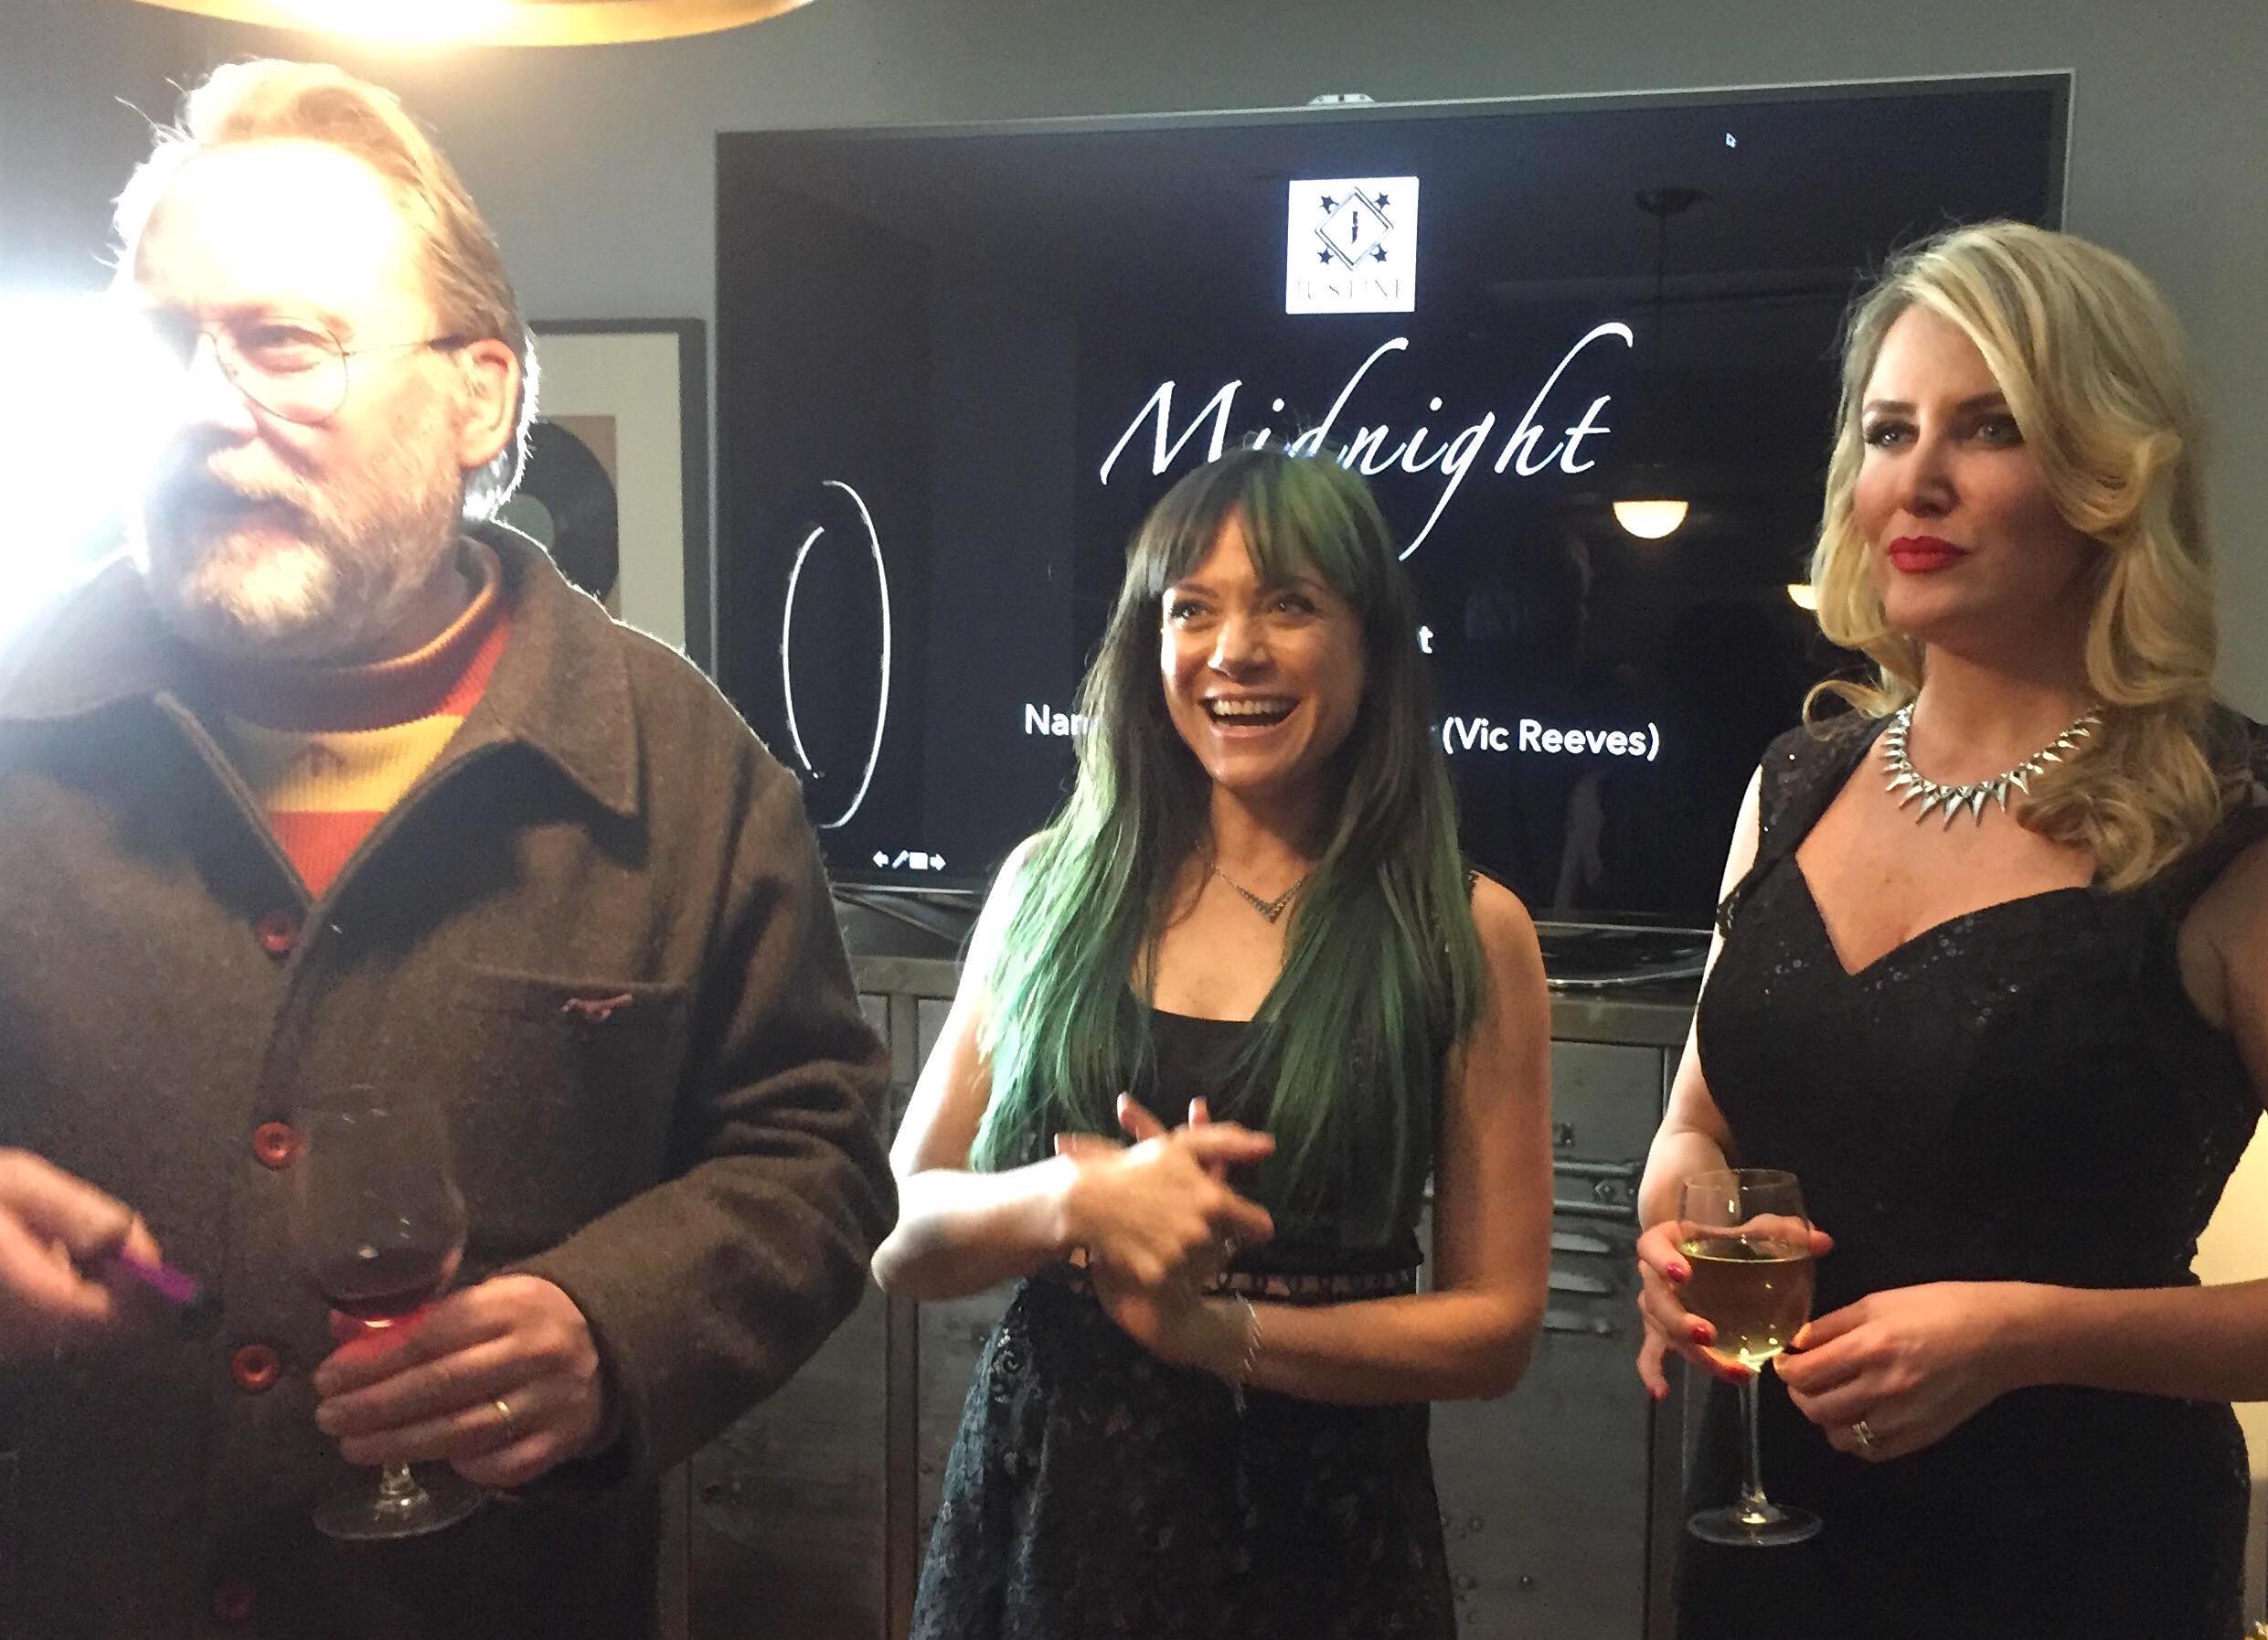 Actor/Artist/Comedian Jim Moir(Vic Reeves) with Model Nancy Sorrell and Justine Cullen